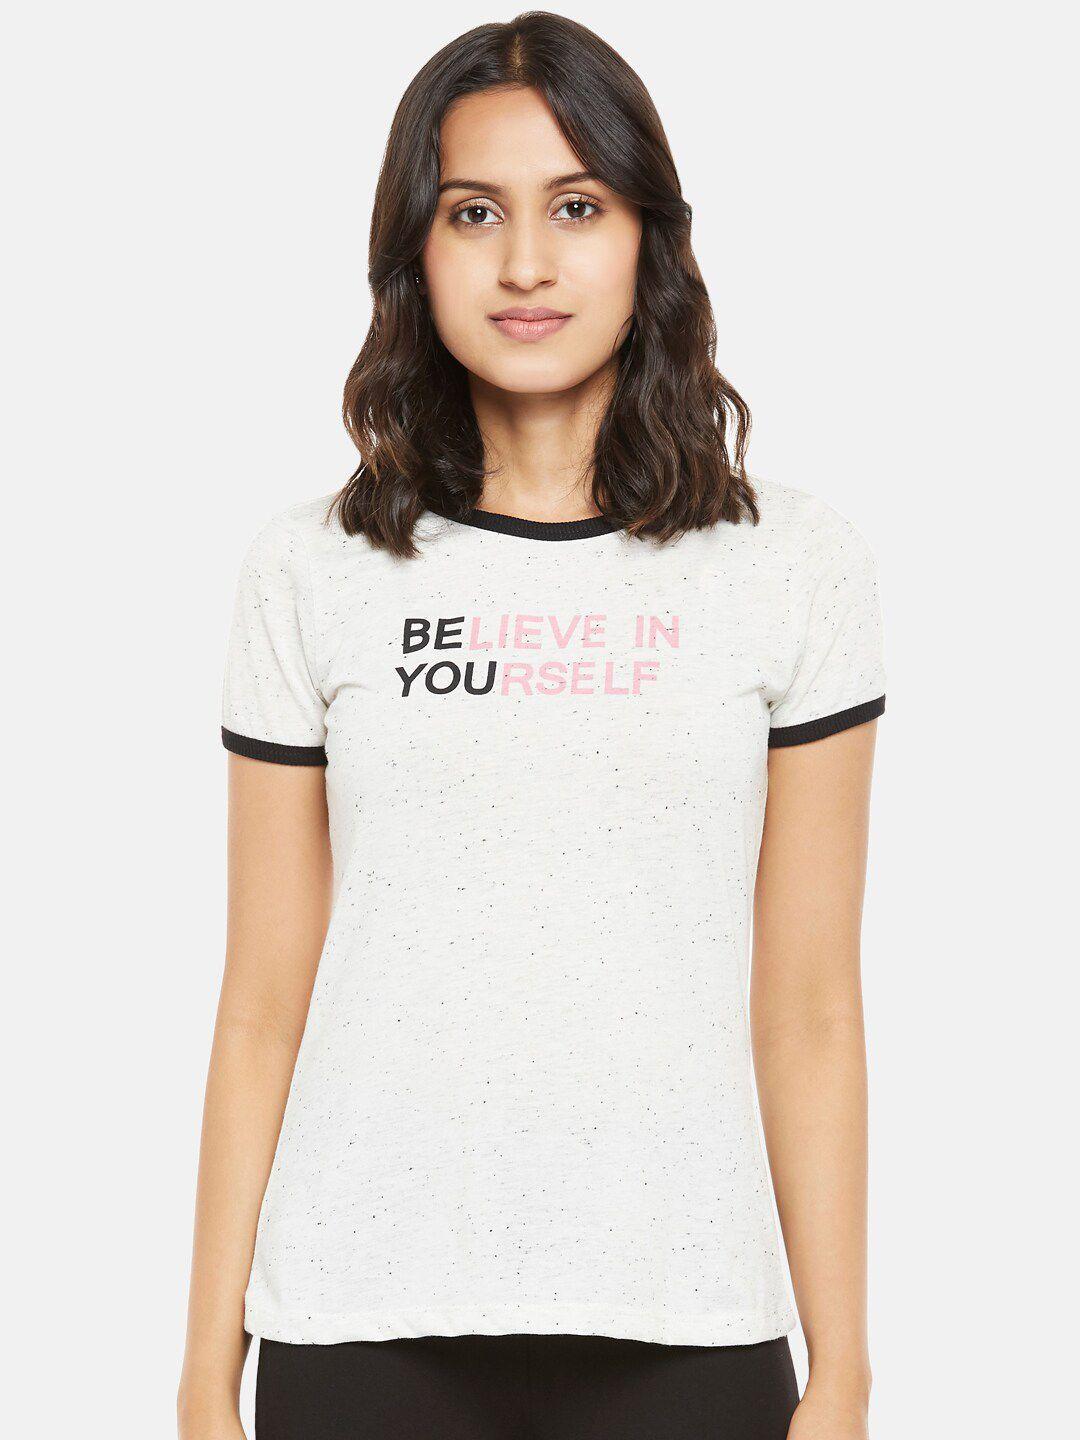 honey-by-pantaloons-women-off-white-typography-printed-t-shirt